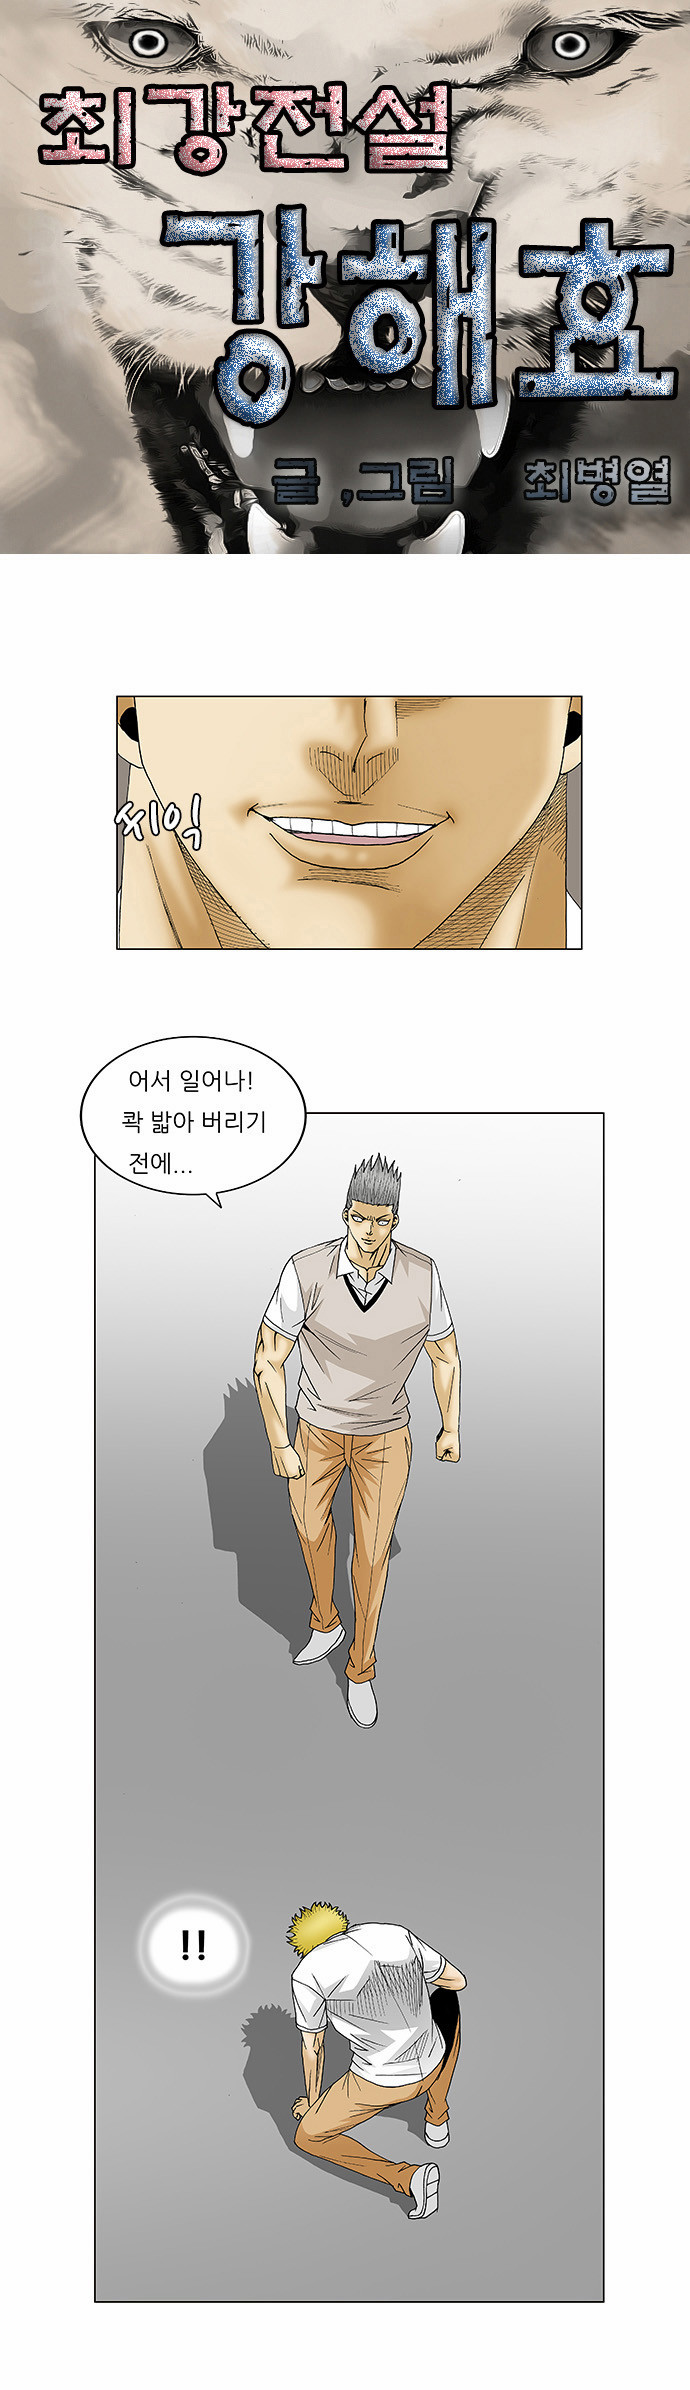 Ultimate Legend - Kang Hae Hyo - Chapter 111 - Page 3